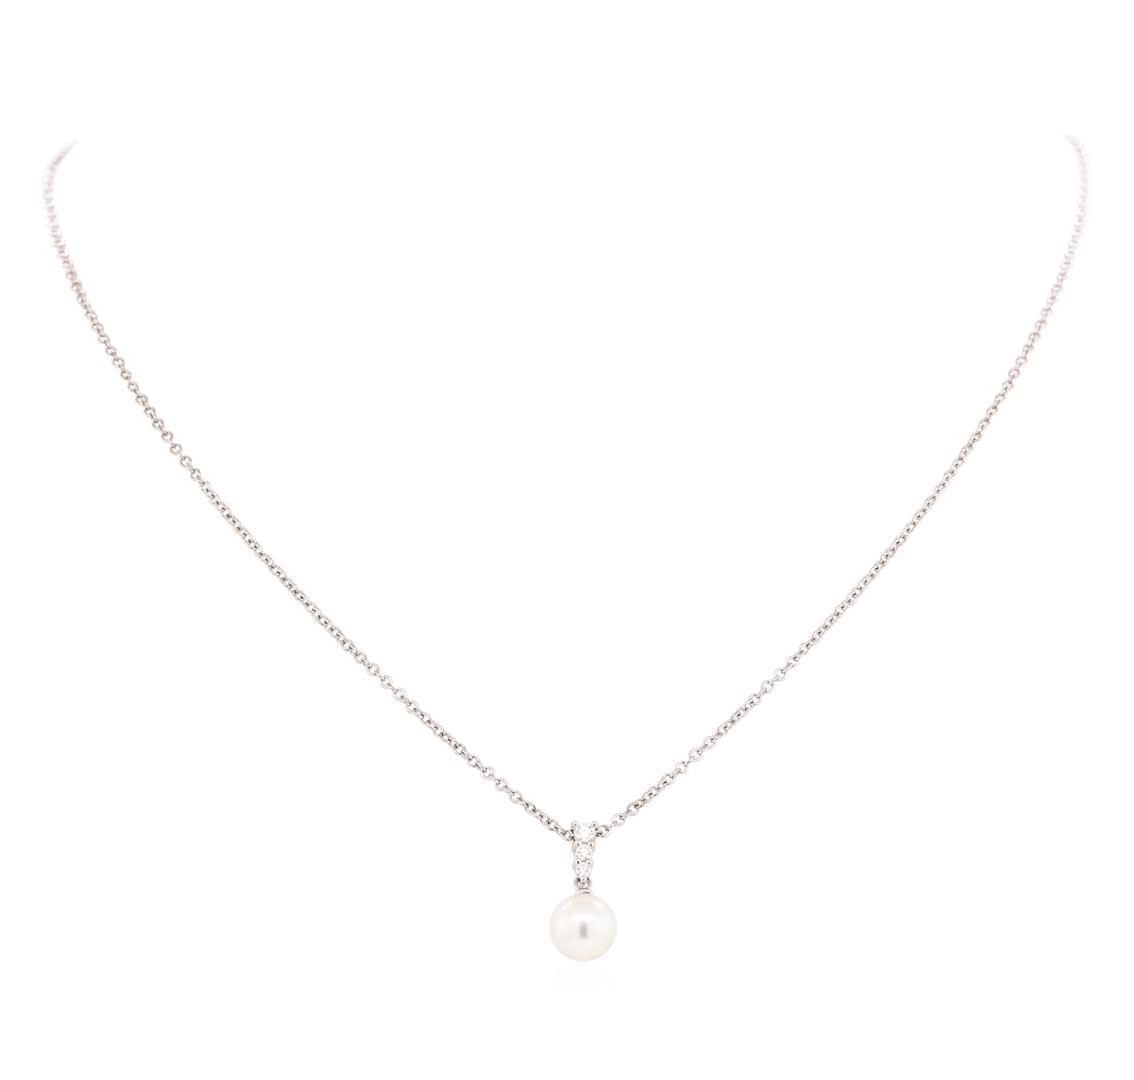 Pearl and Diamond Pendant with Chain - 18KT White Gold